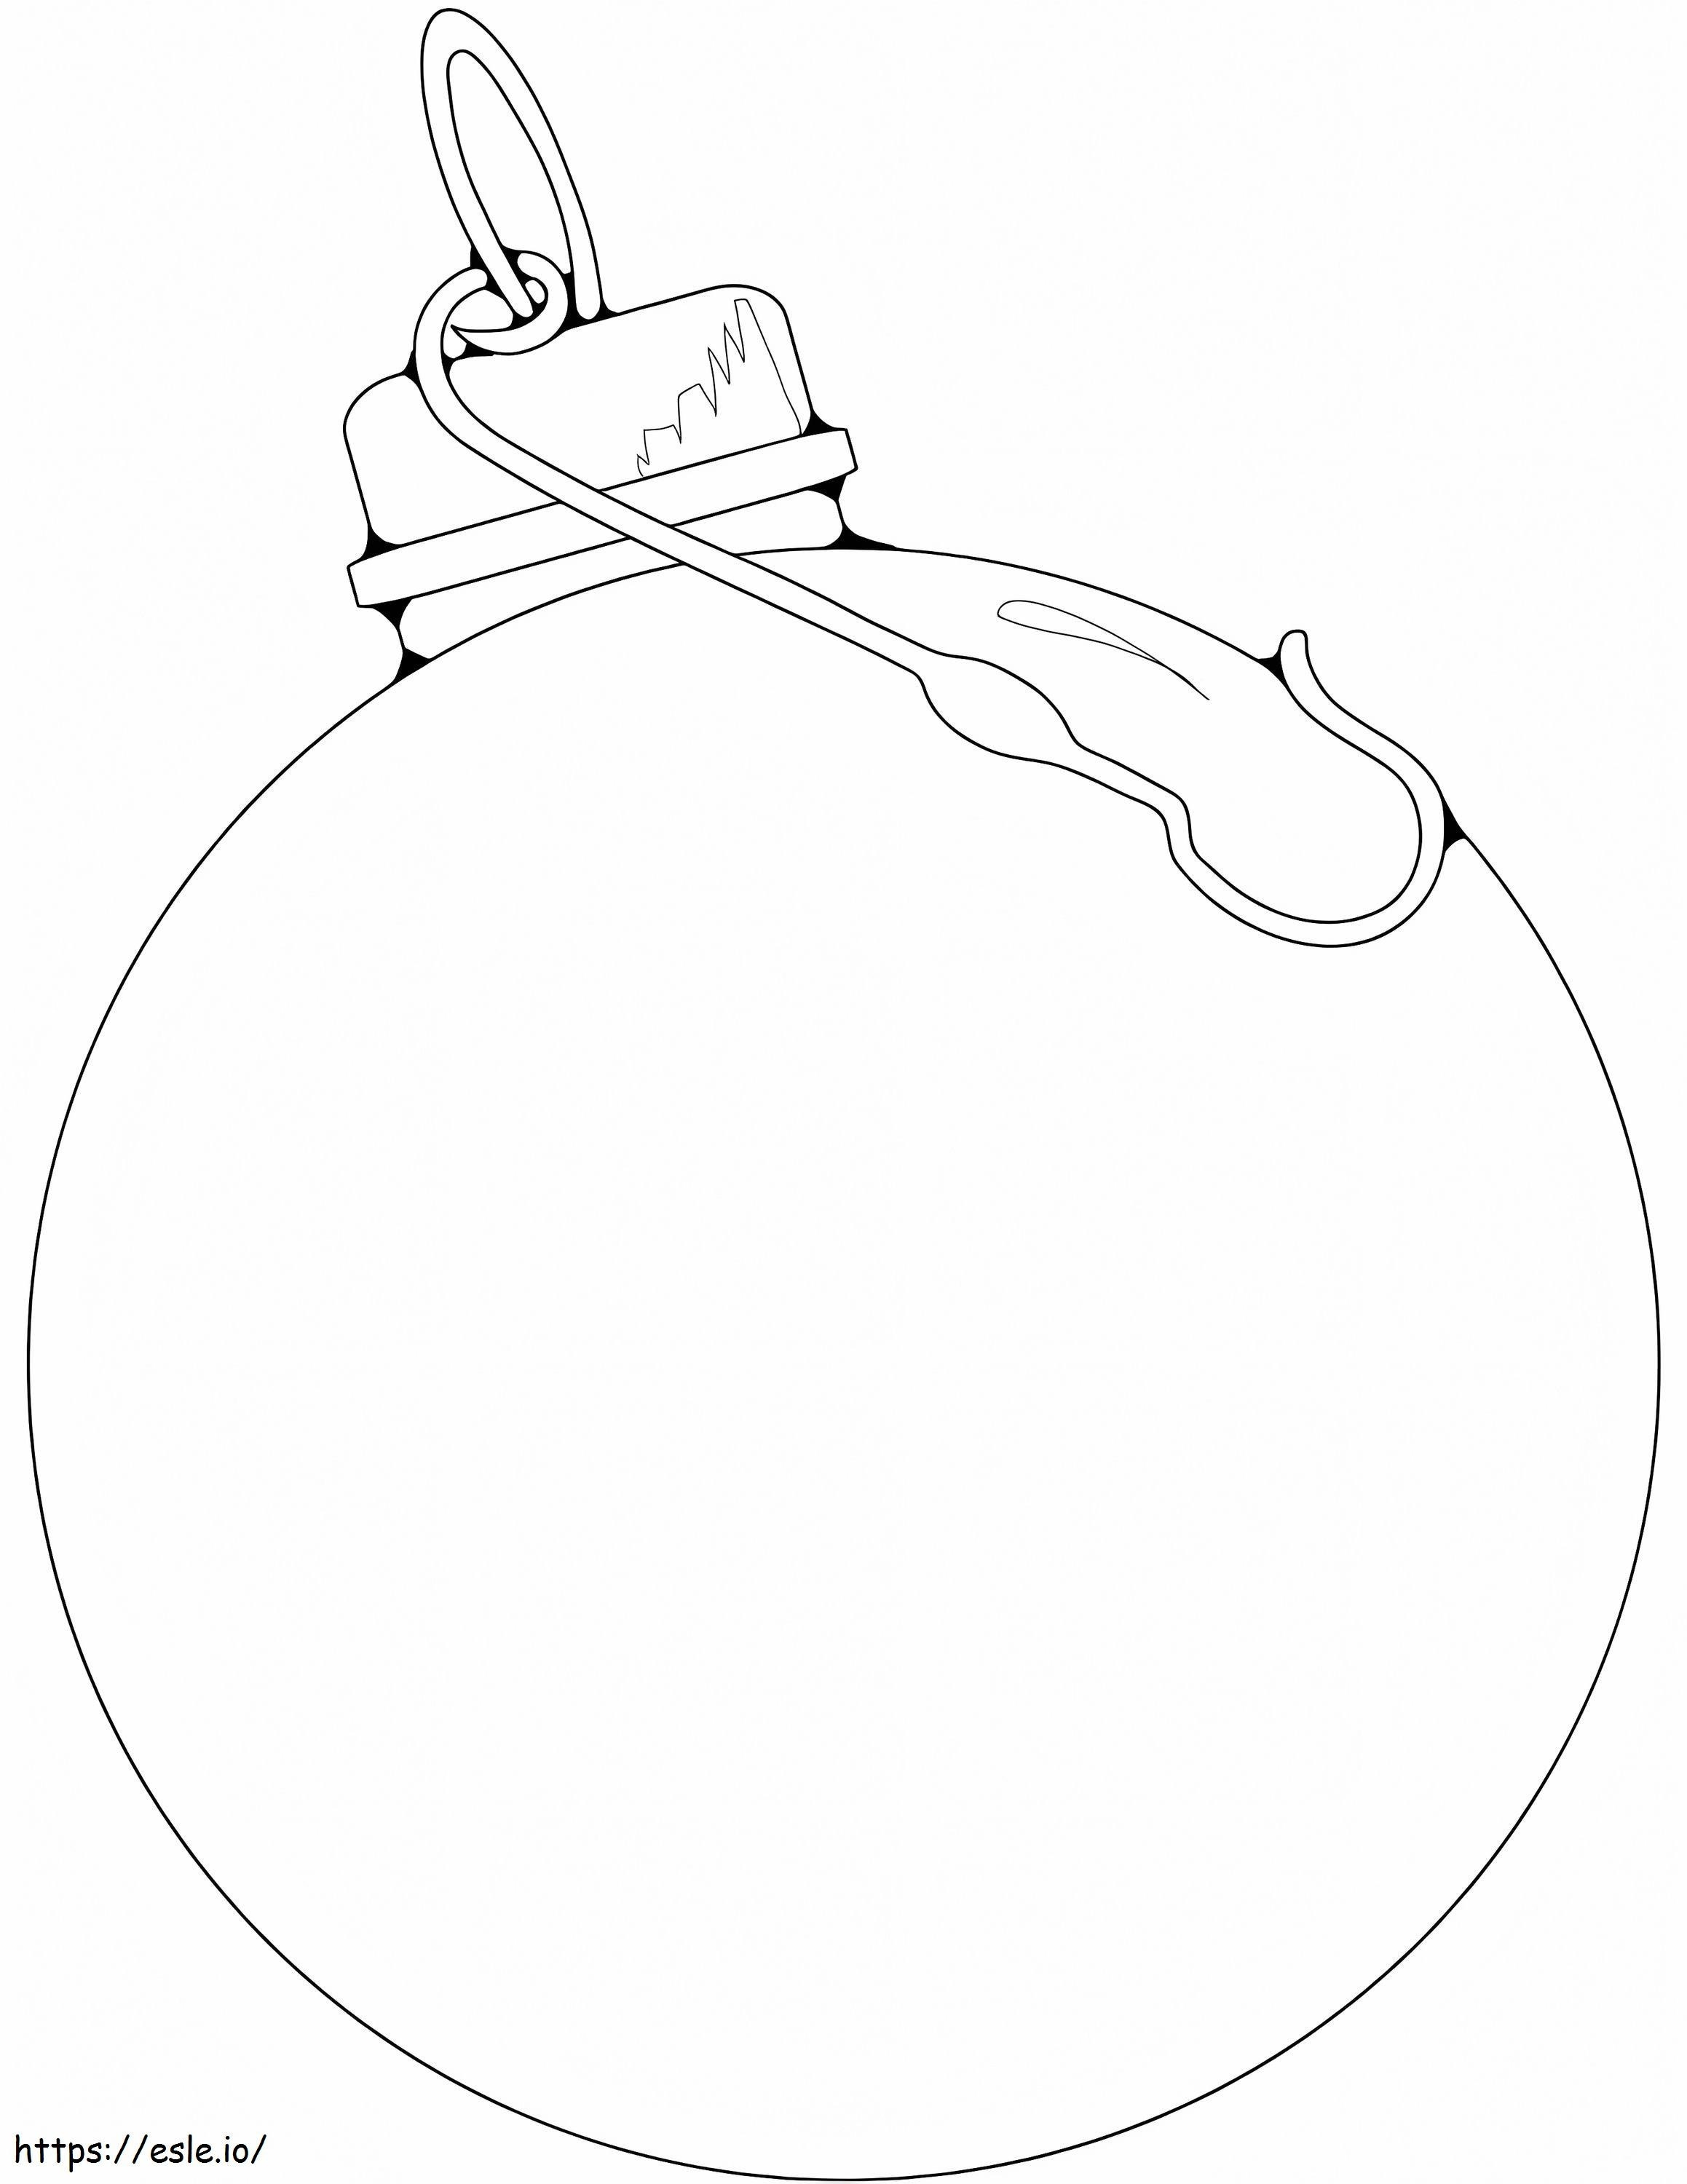 Blank Ornament coloring page